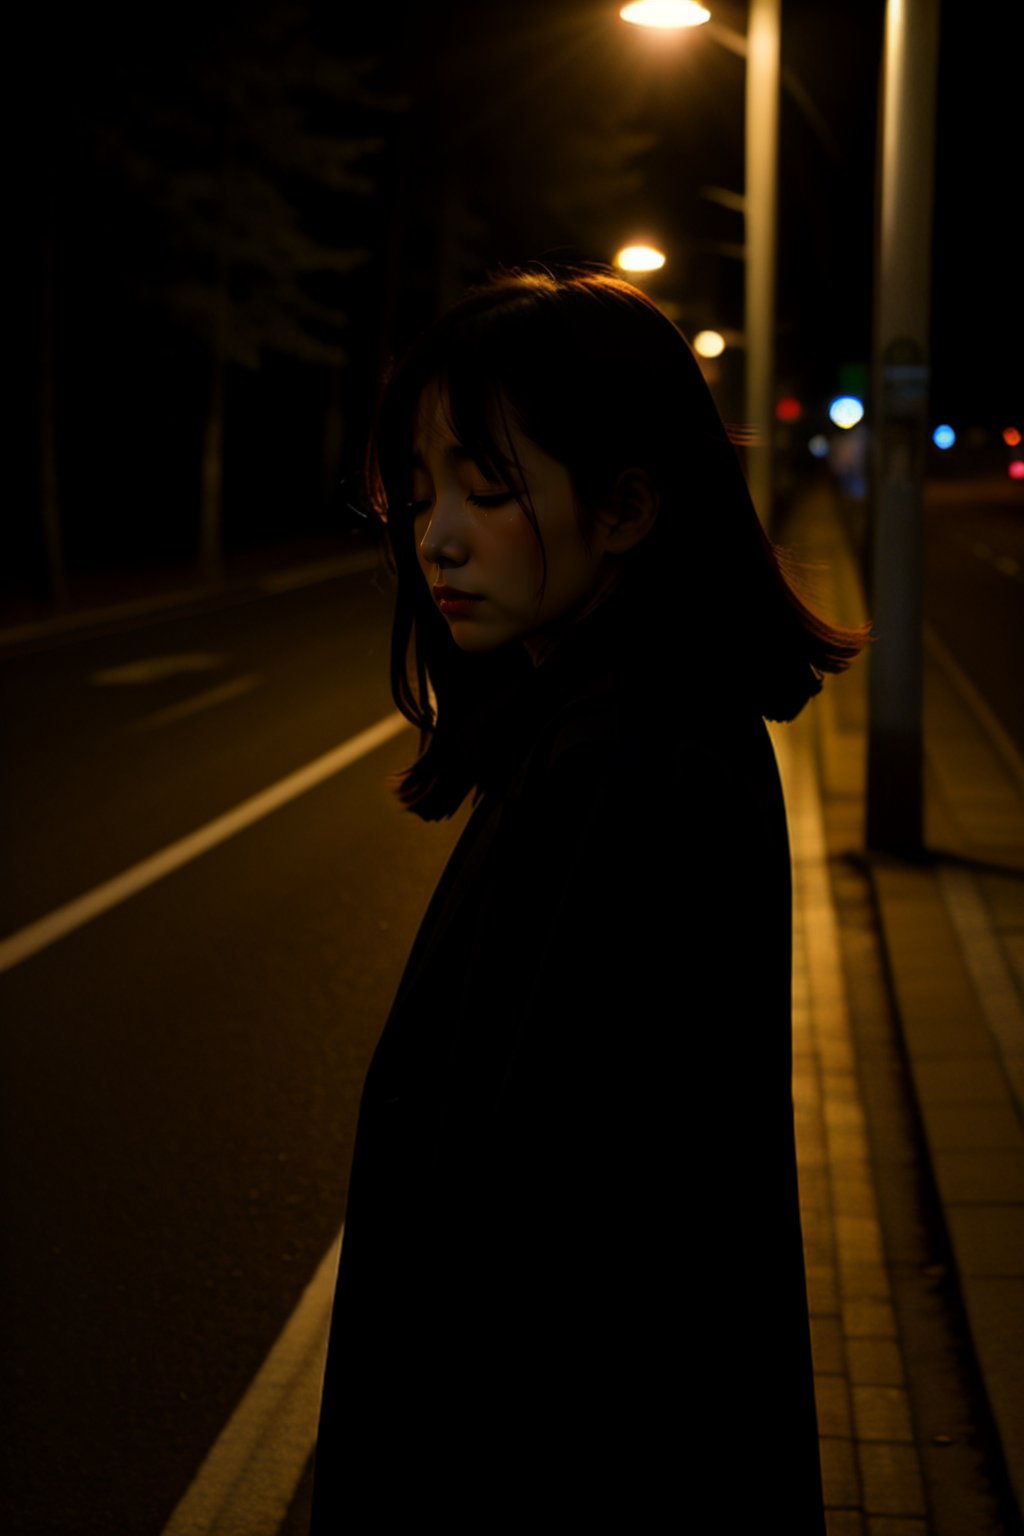 high  resolution, dark,dark forest, low light, beautiful asian girl, dark_hair, black coat, upset face, sad face, low light from street lamp on the road, eyes look down, head look down, one hand on face, eyes closed, smooth forehaed, cry